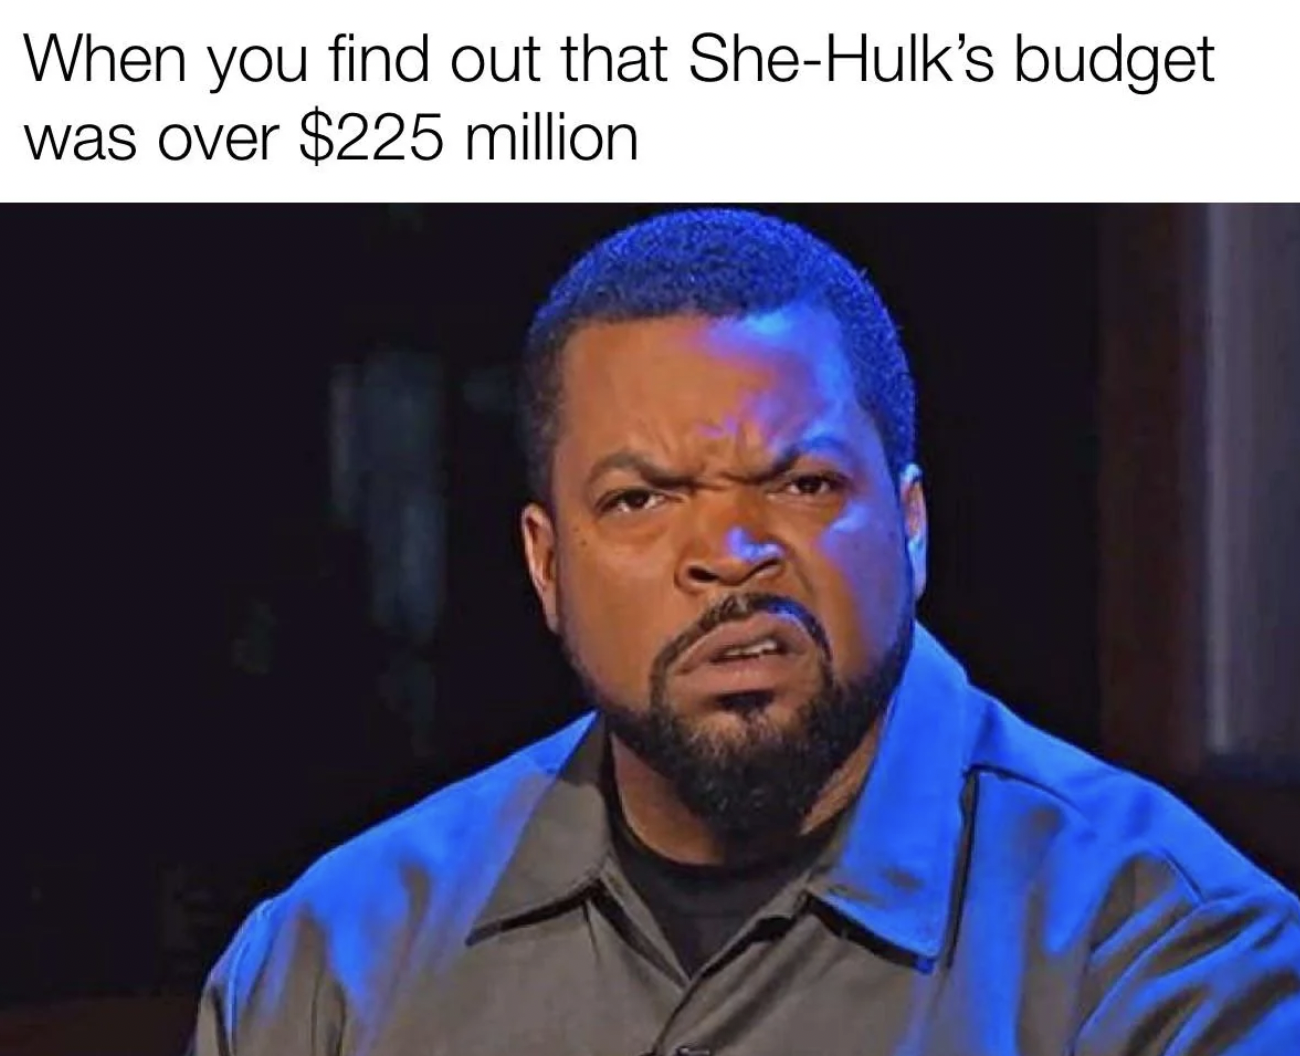 photo caption - When you find out that SheHulk's budget was over $225 million